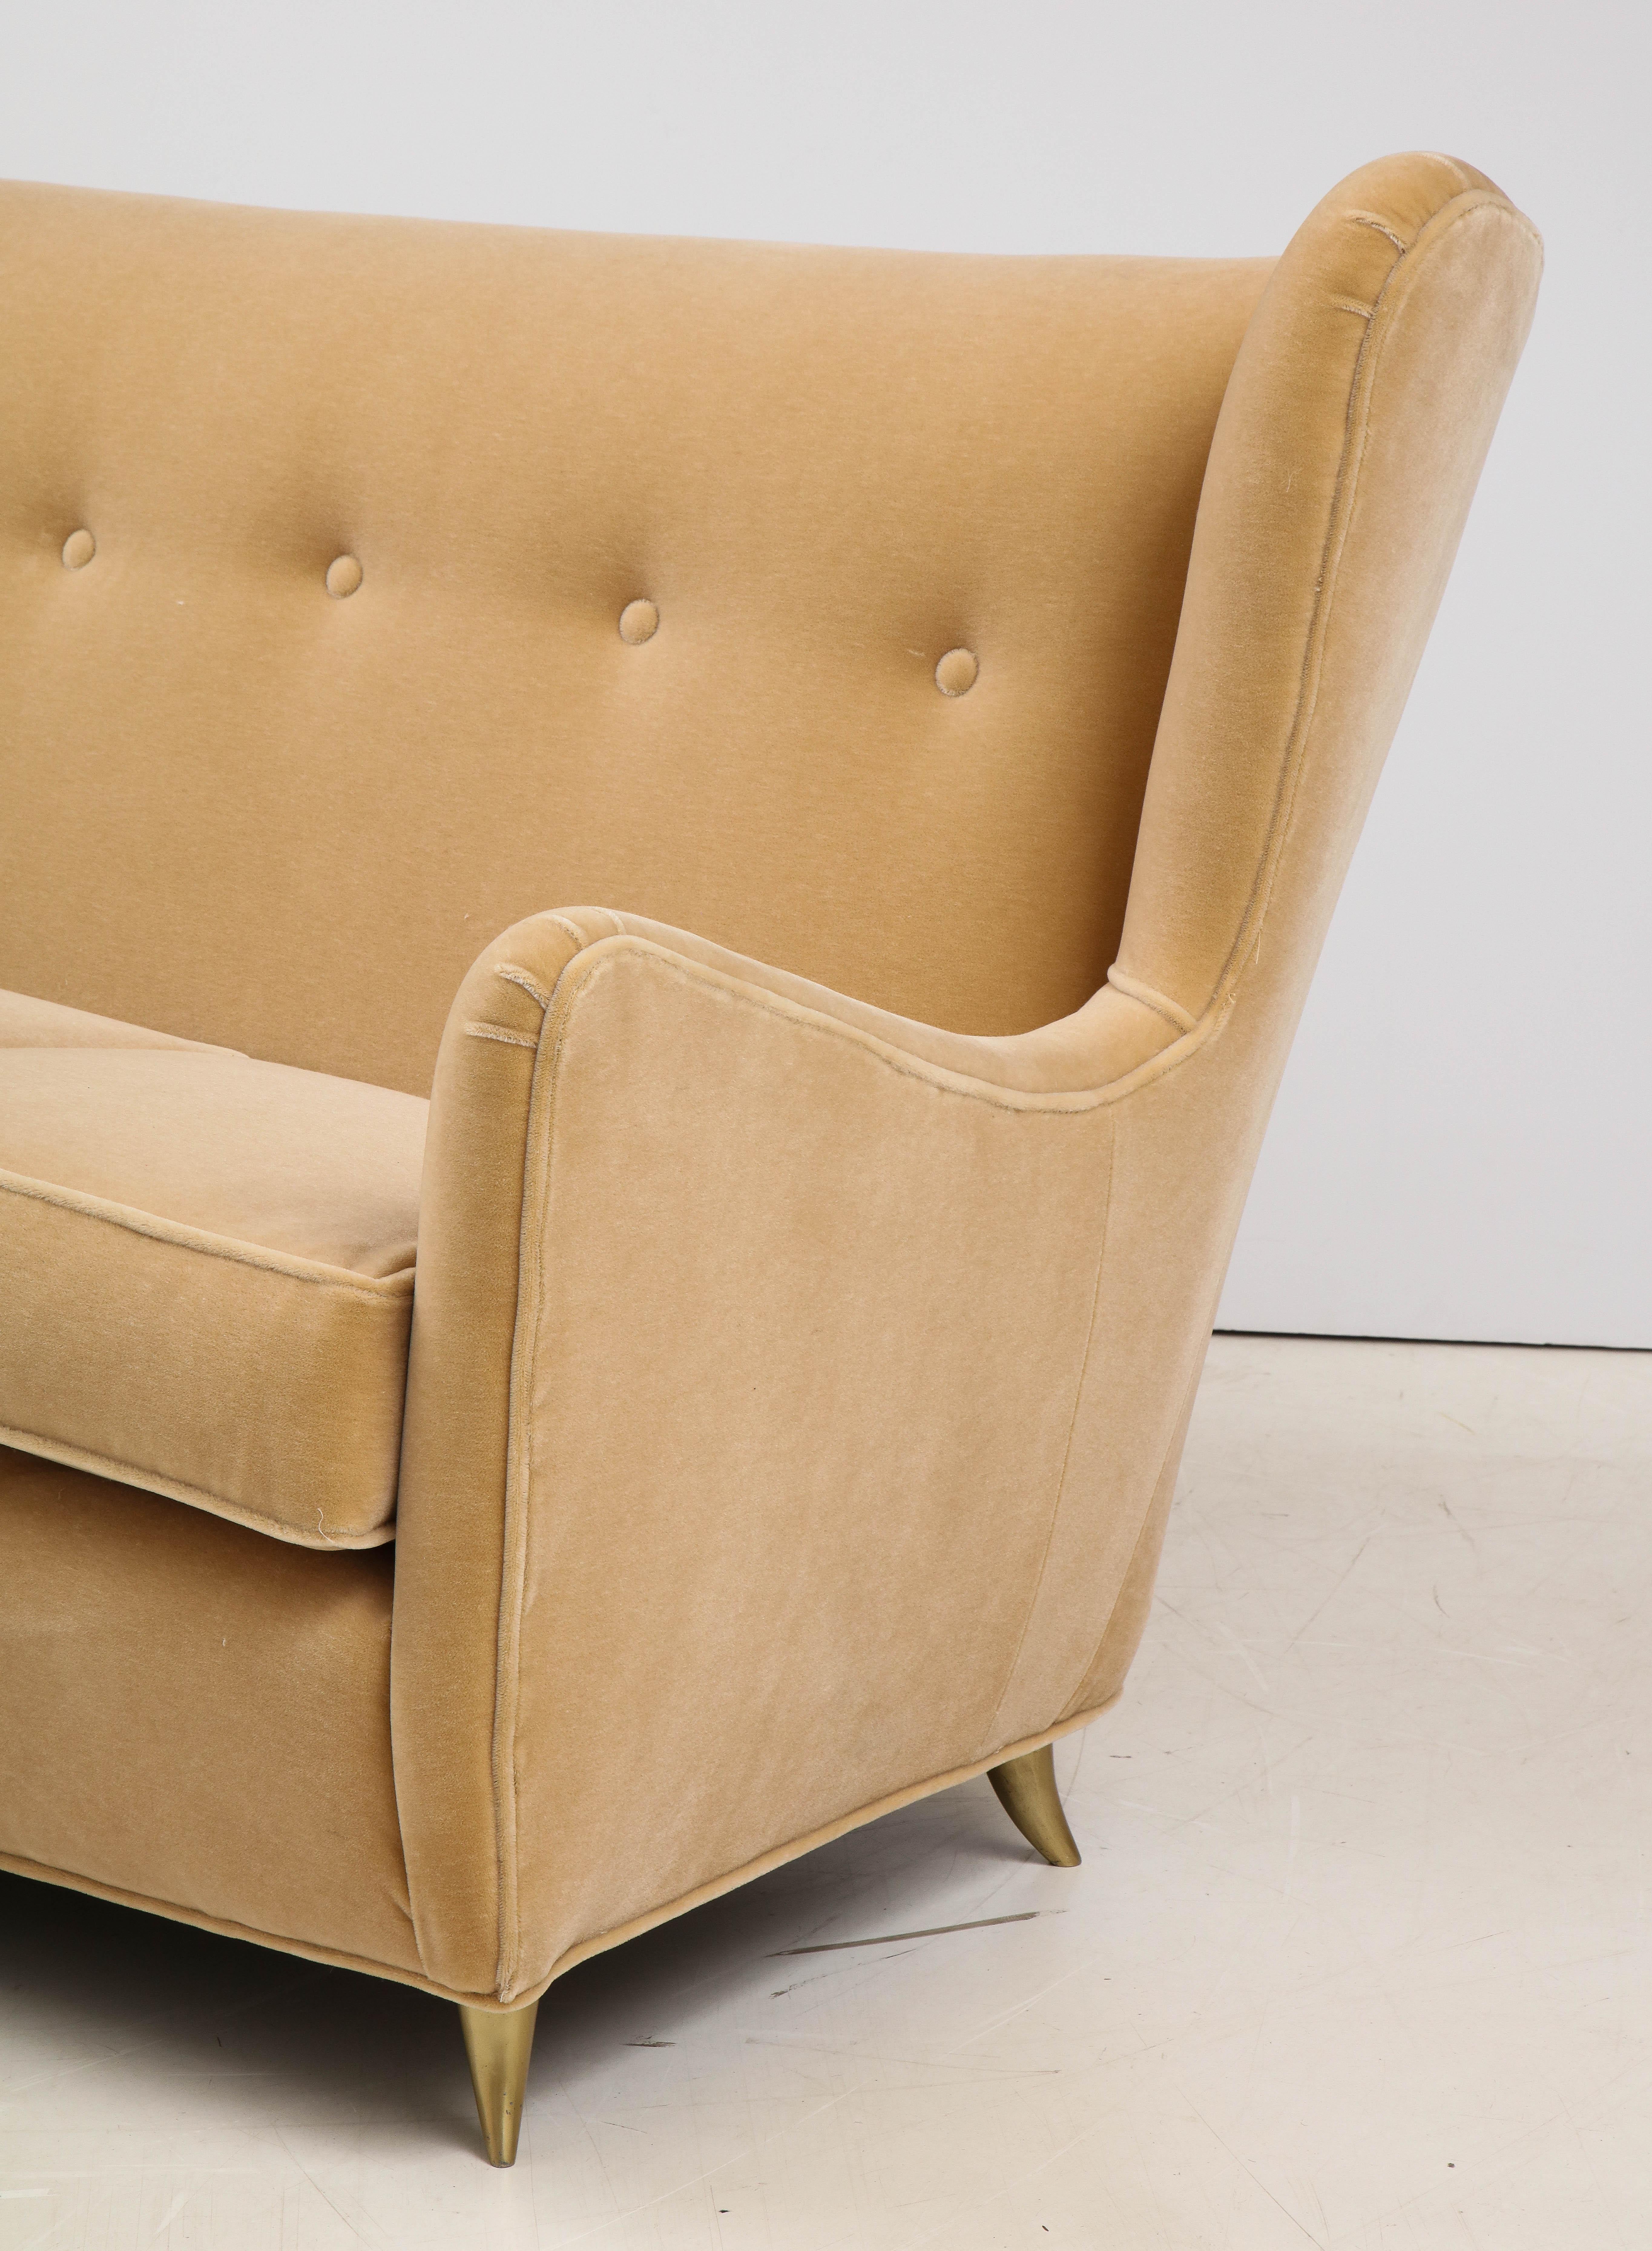 Gio Ponti Style Italian Wingback SofaIn Mohair Fabric In Good Condition For Sale In New York, NY